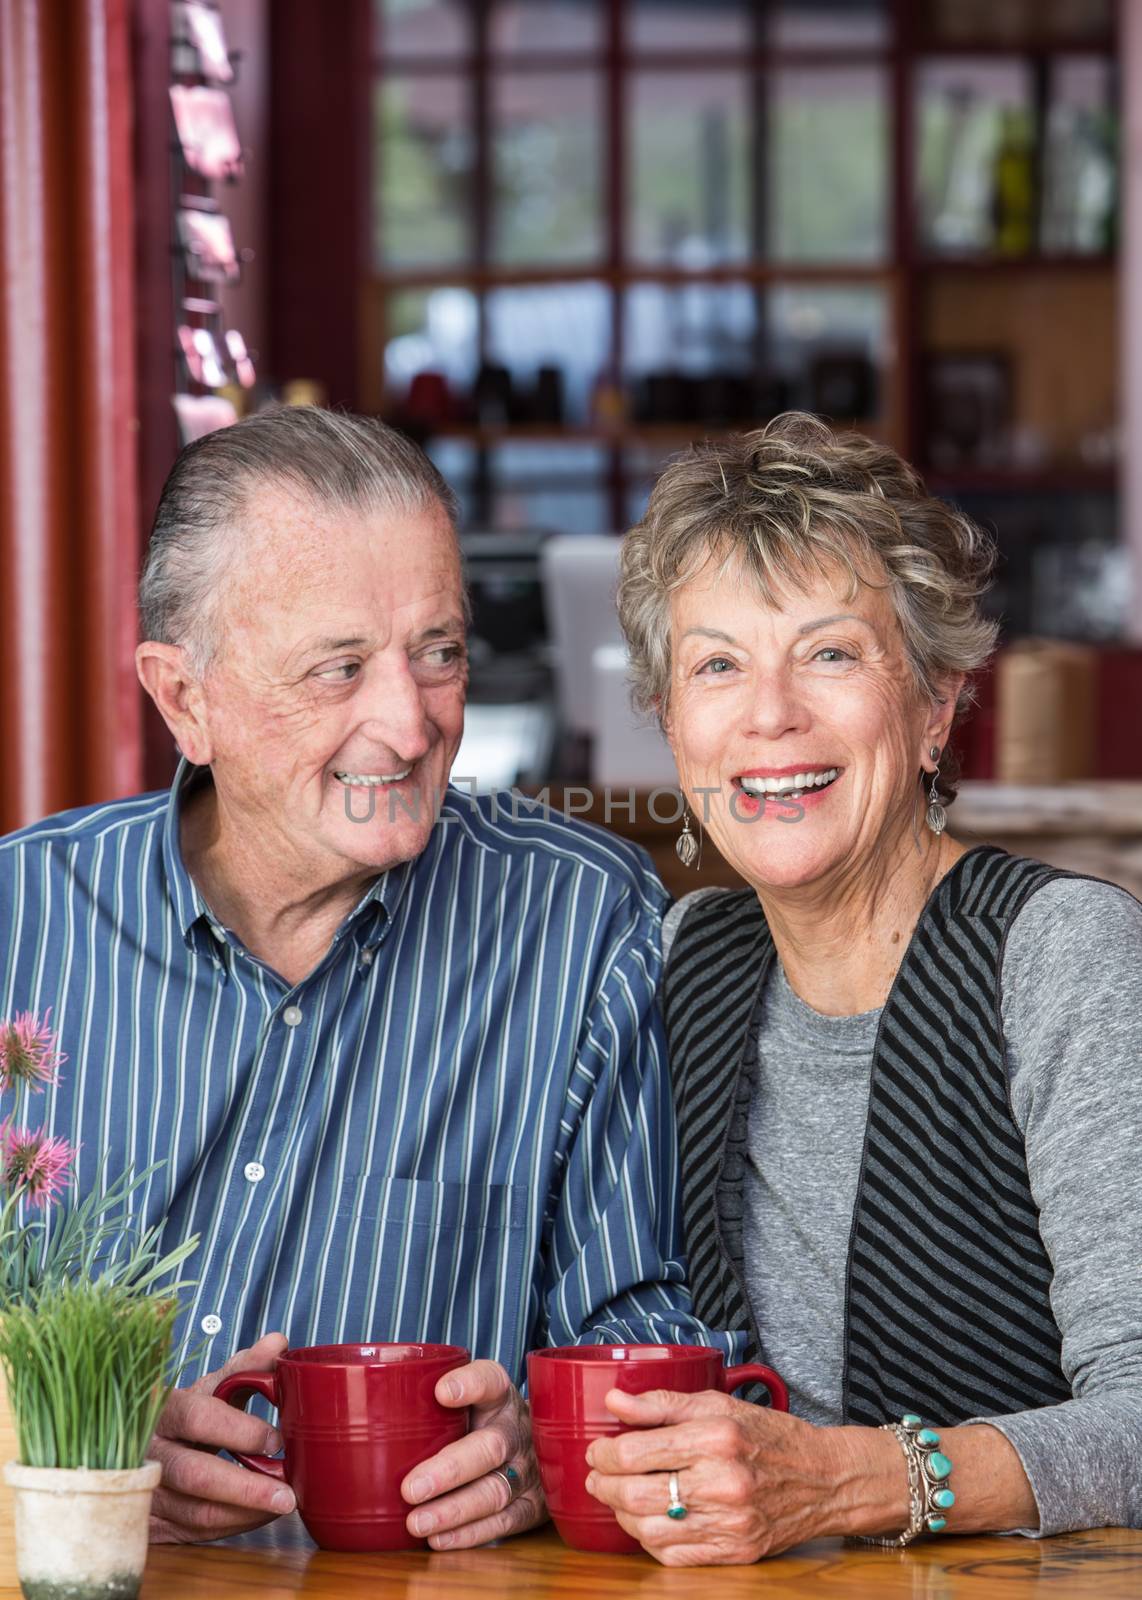 Attractive smiling mature couple sitting together in a coffee house